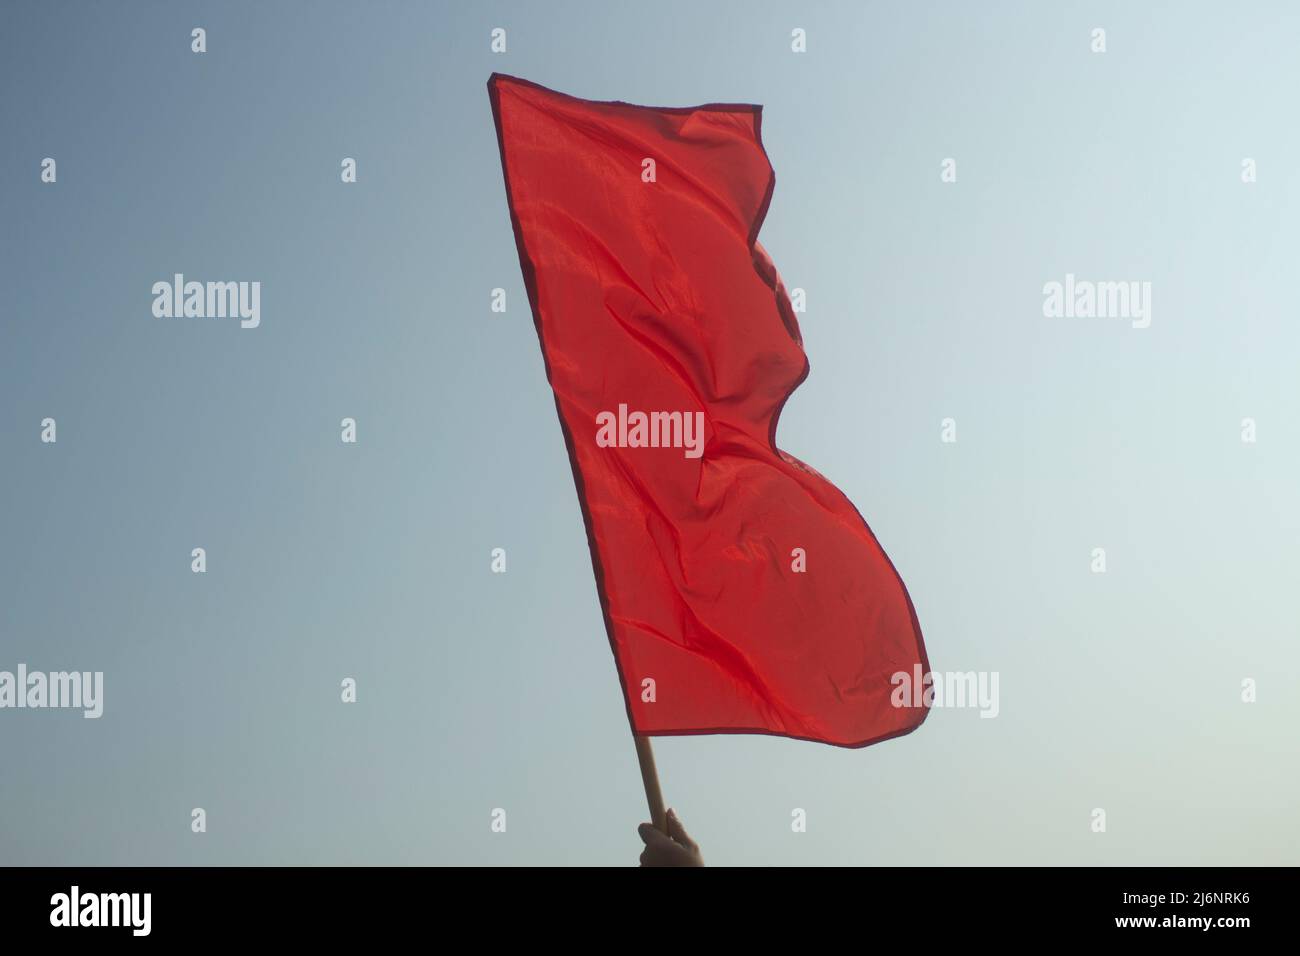 Red flag in his hand against sky. Red matter on pole. Signal to start start. Flag developing in wind. Stock Photo